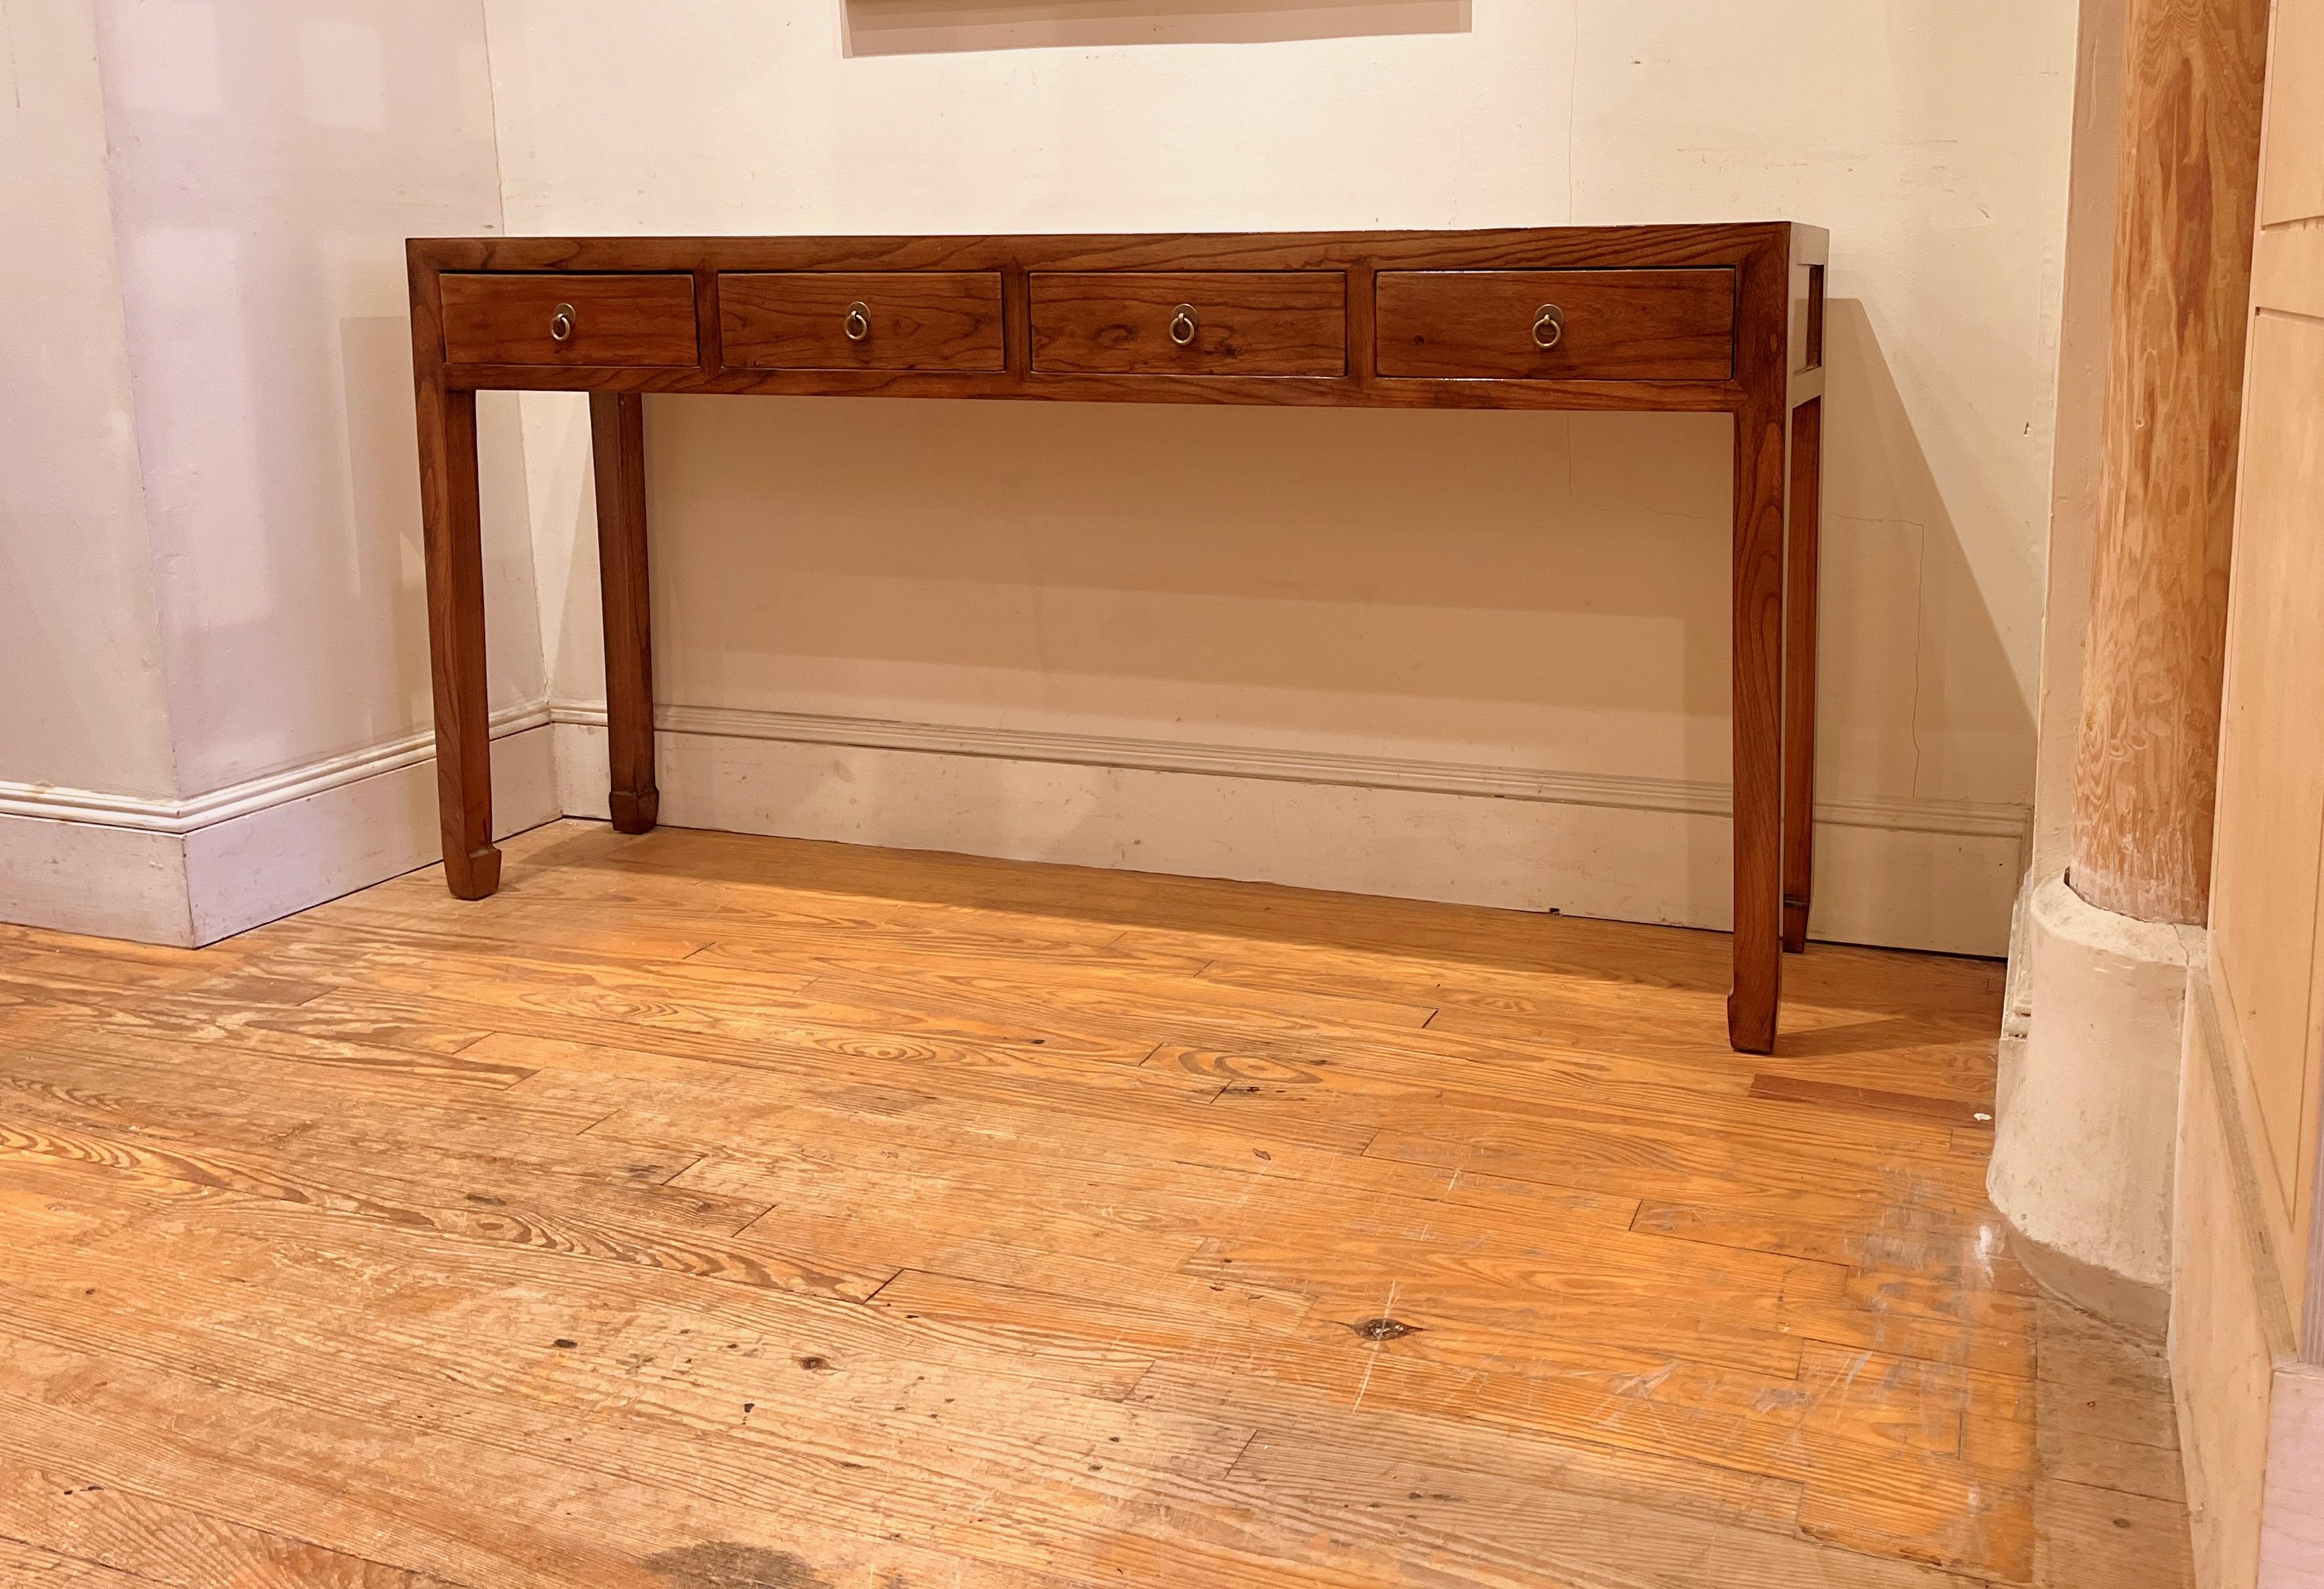 Ming Fine Jumu Console Table with Drawers For Sale